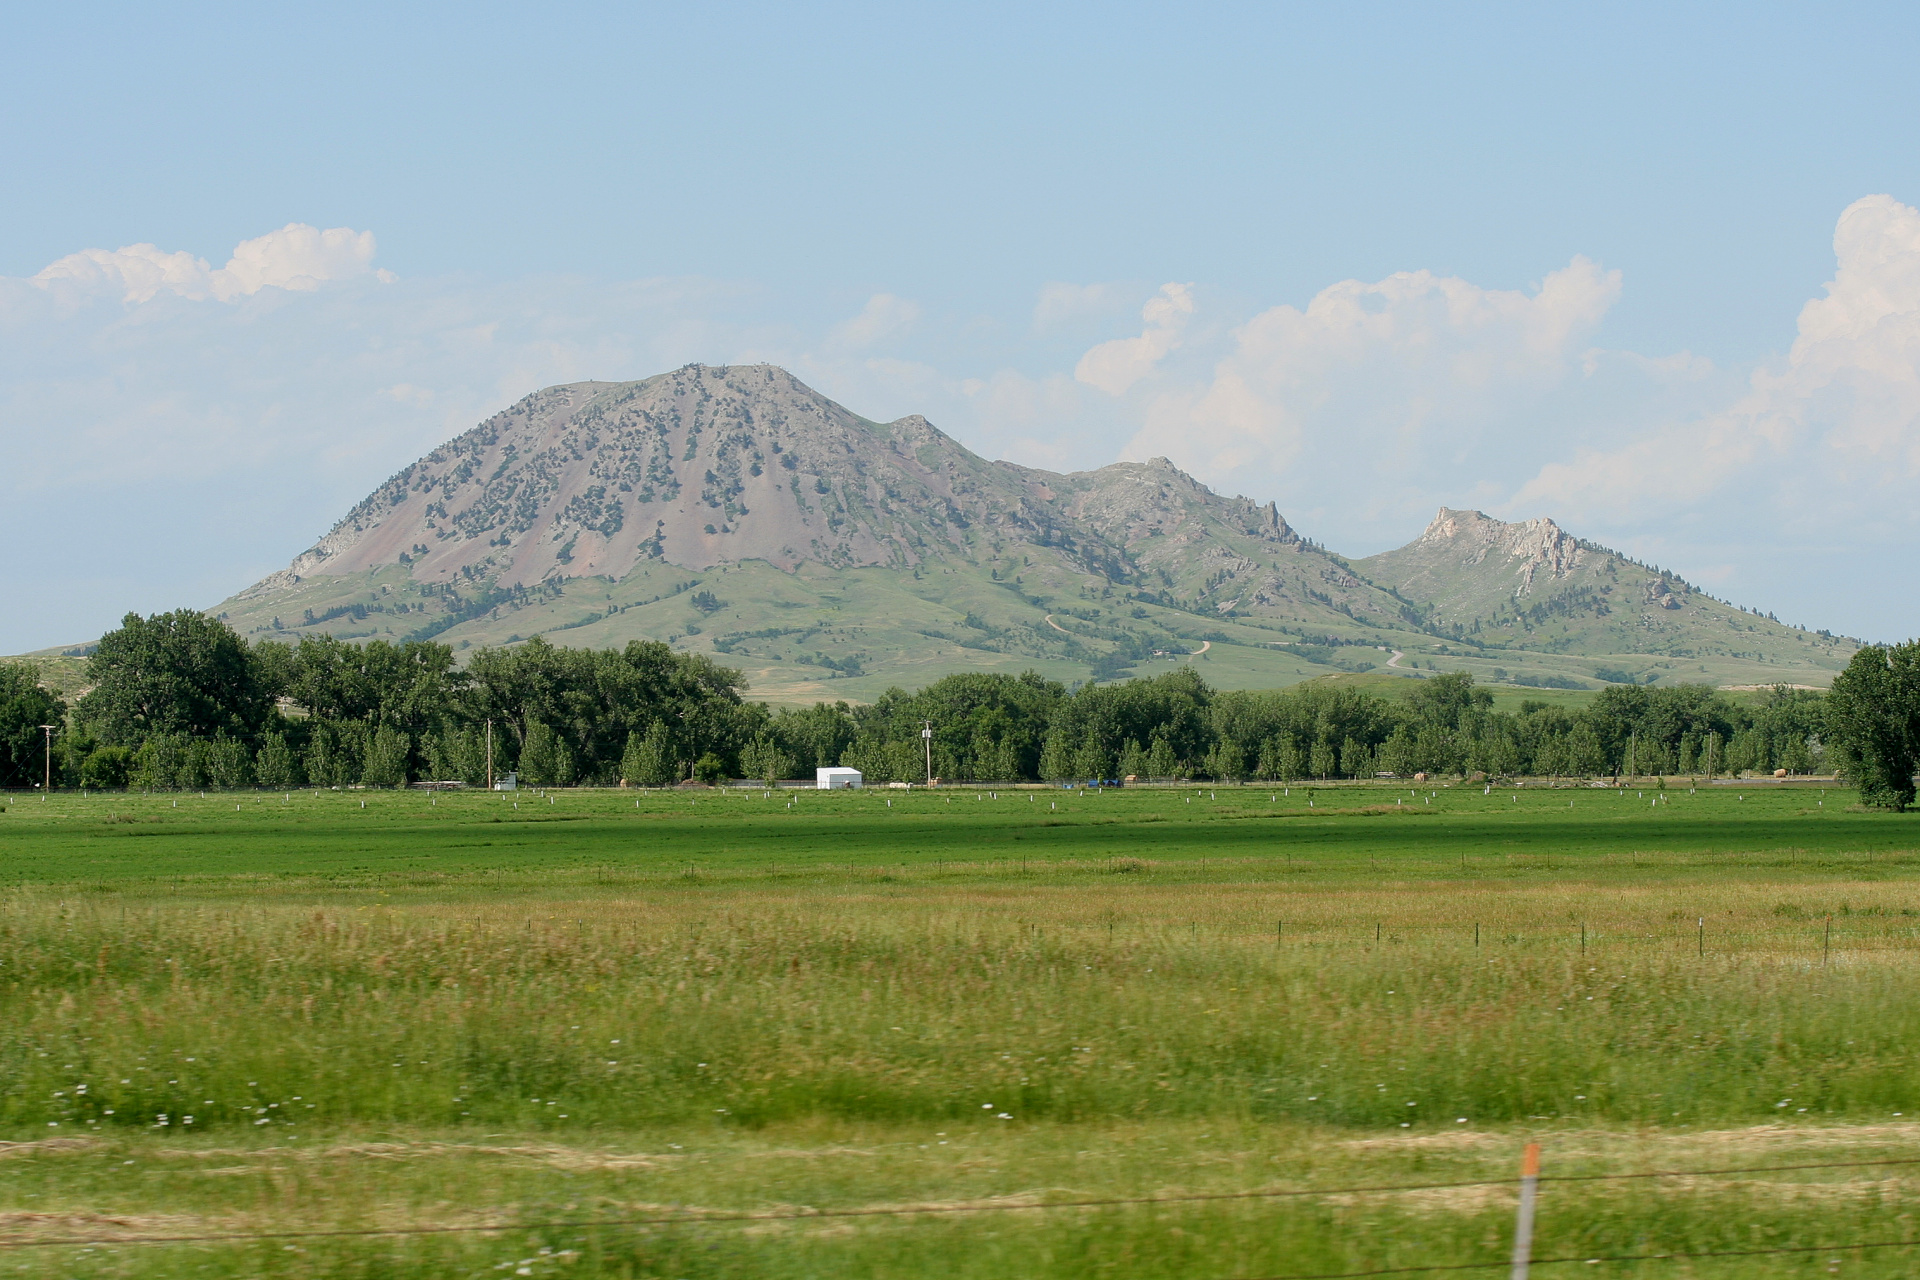 from a distance... (Travels » US Trip 2: Cheyenne Epic » Cheyenne Epic » Bear Butte)